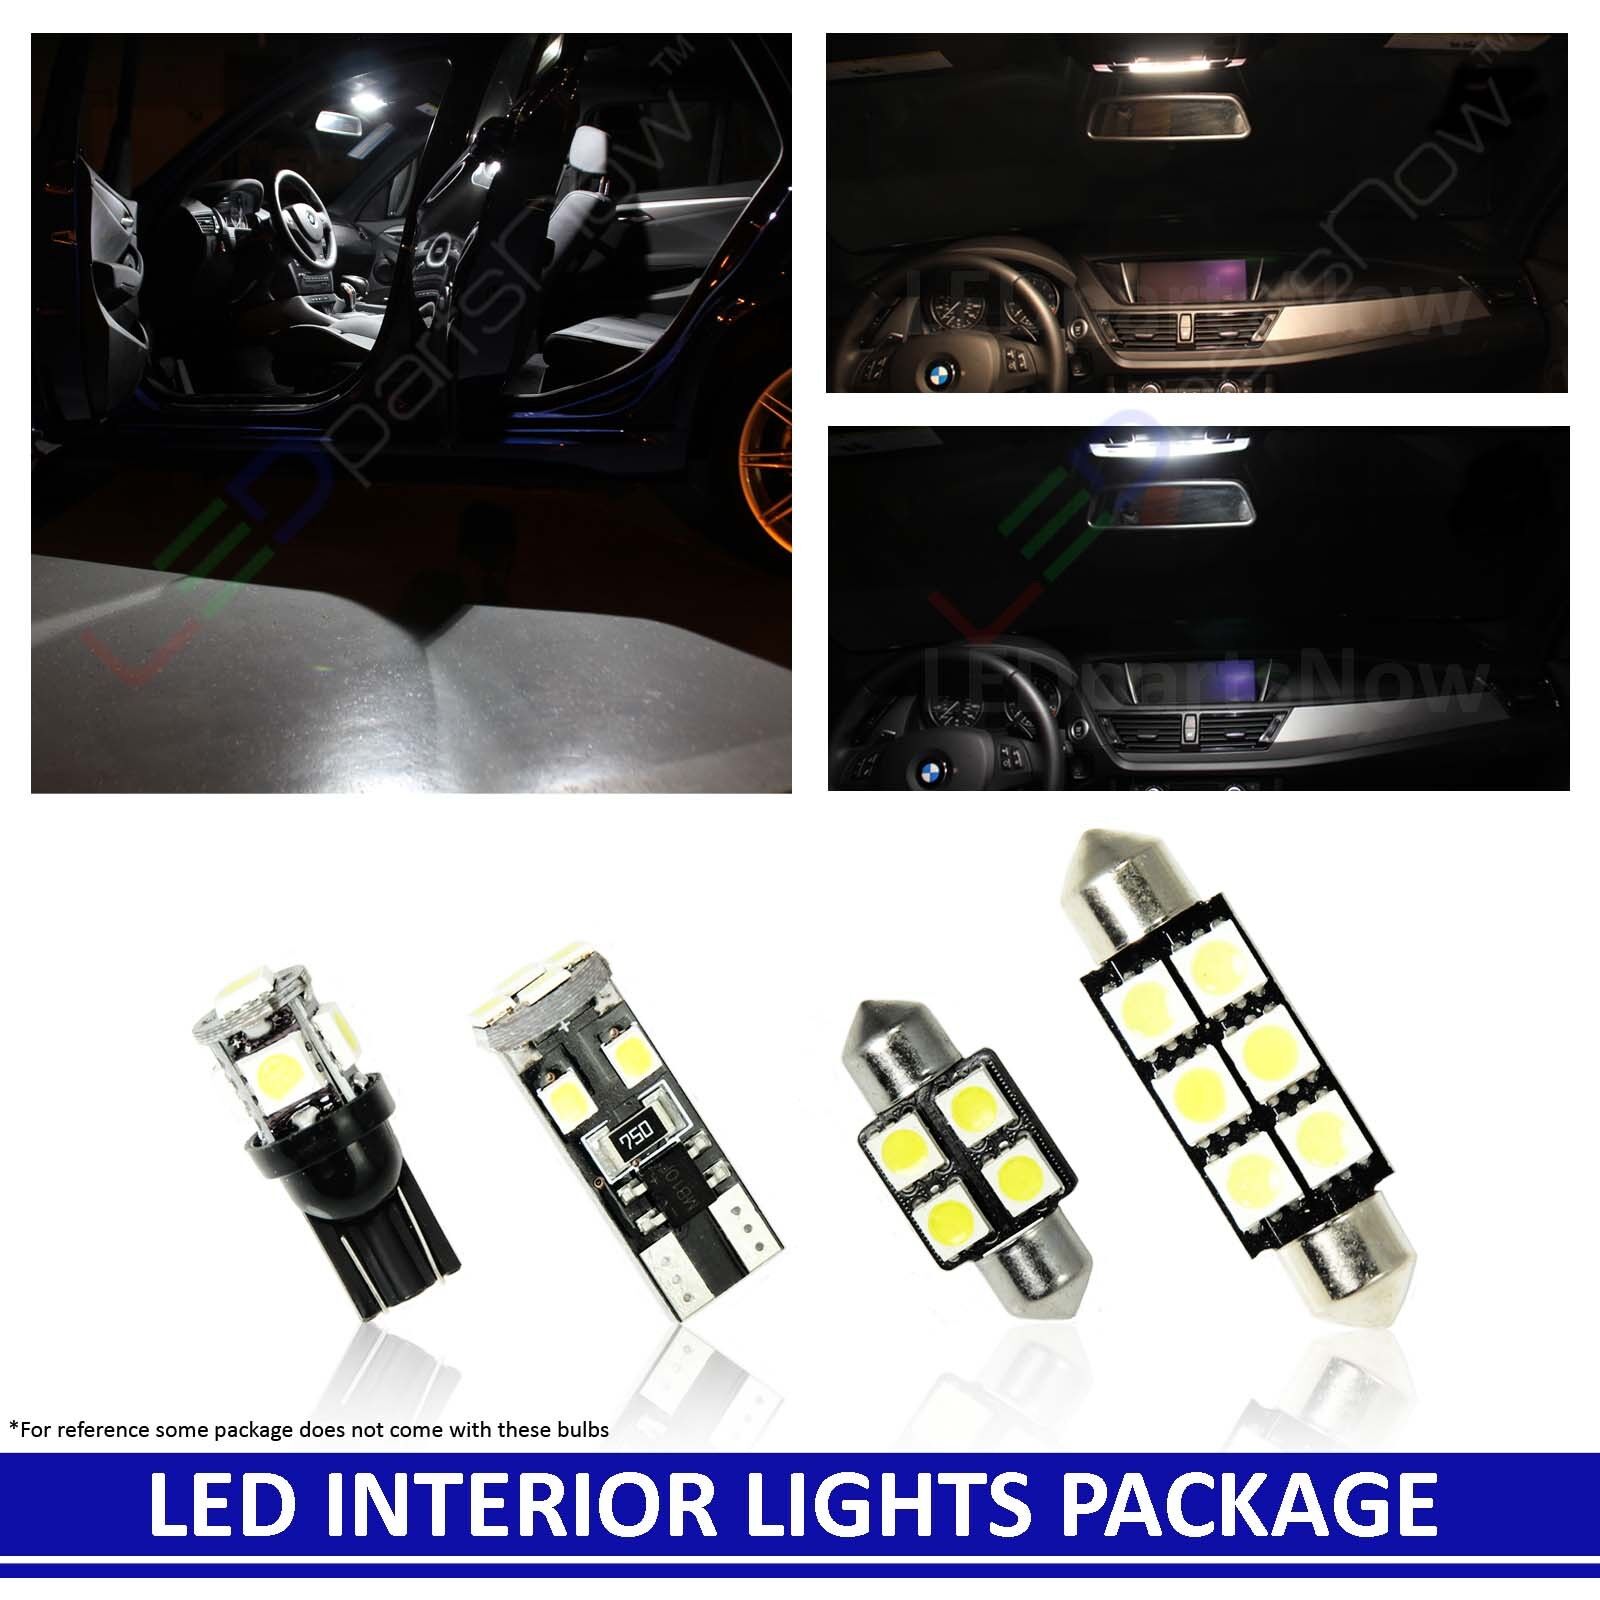 12x 2008-2013 Cadillac CTS White Interior LED Light Bulb Package Kit